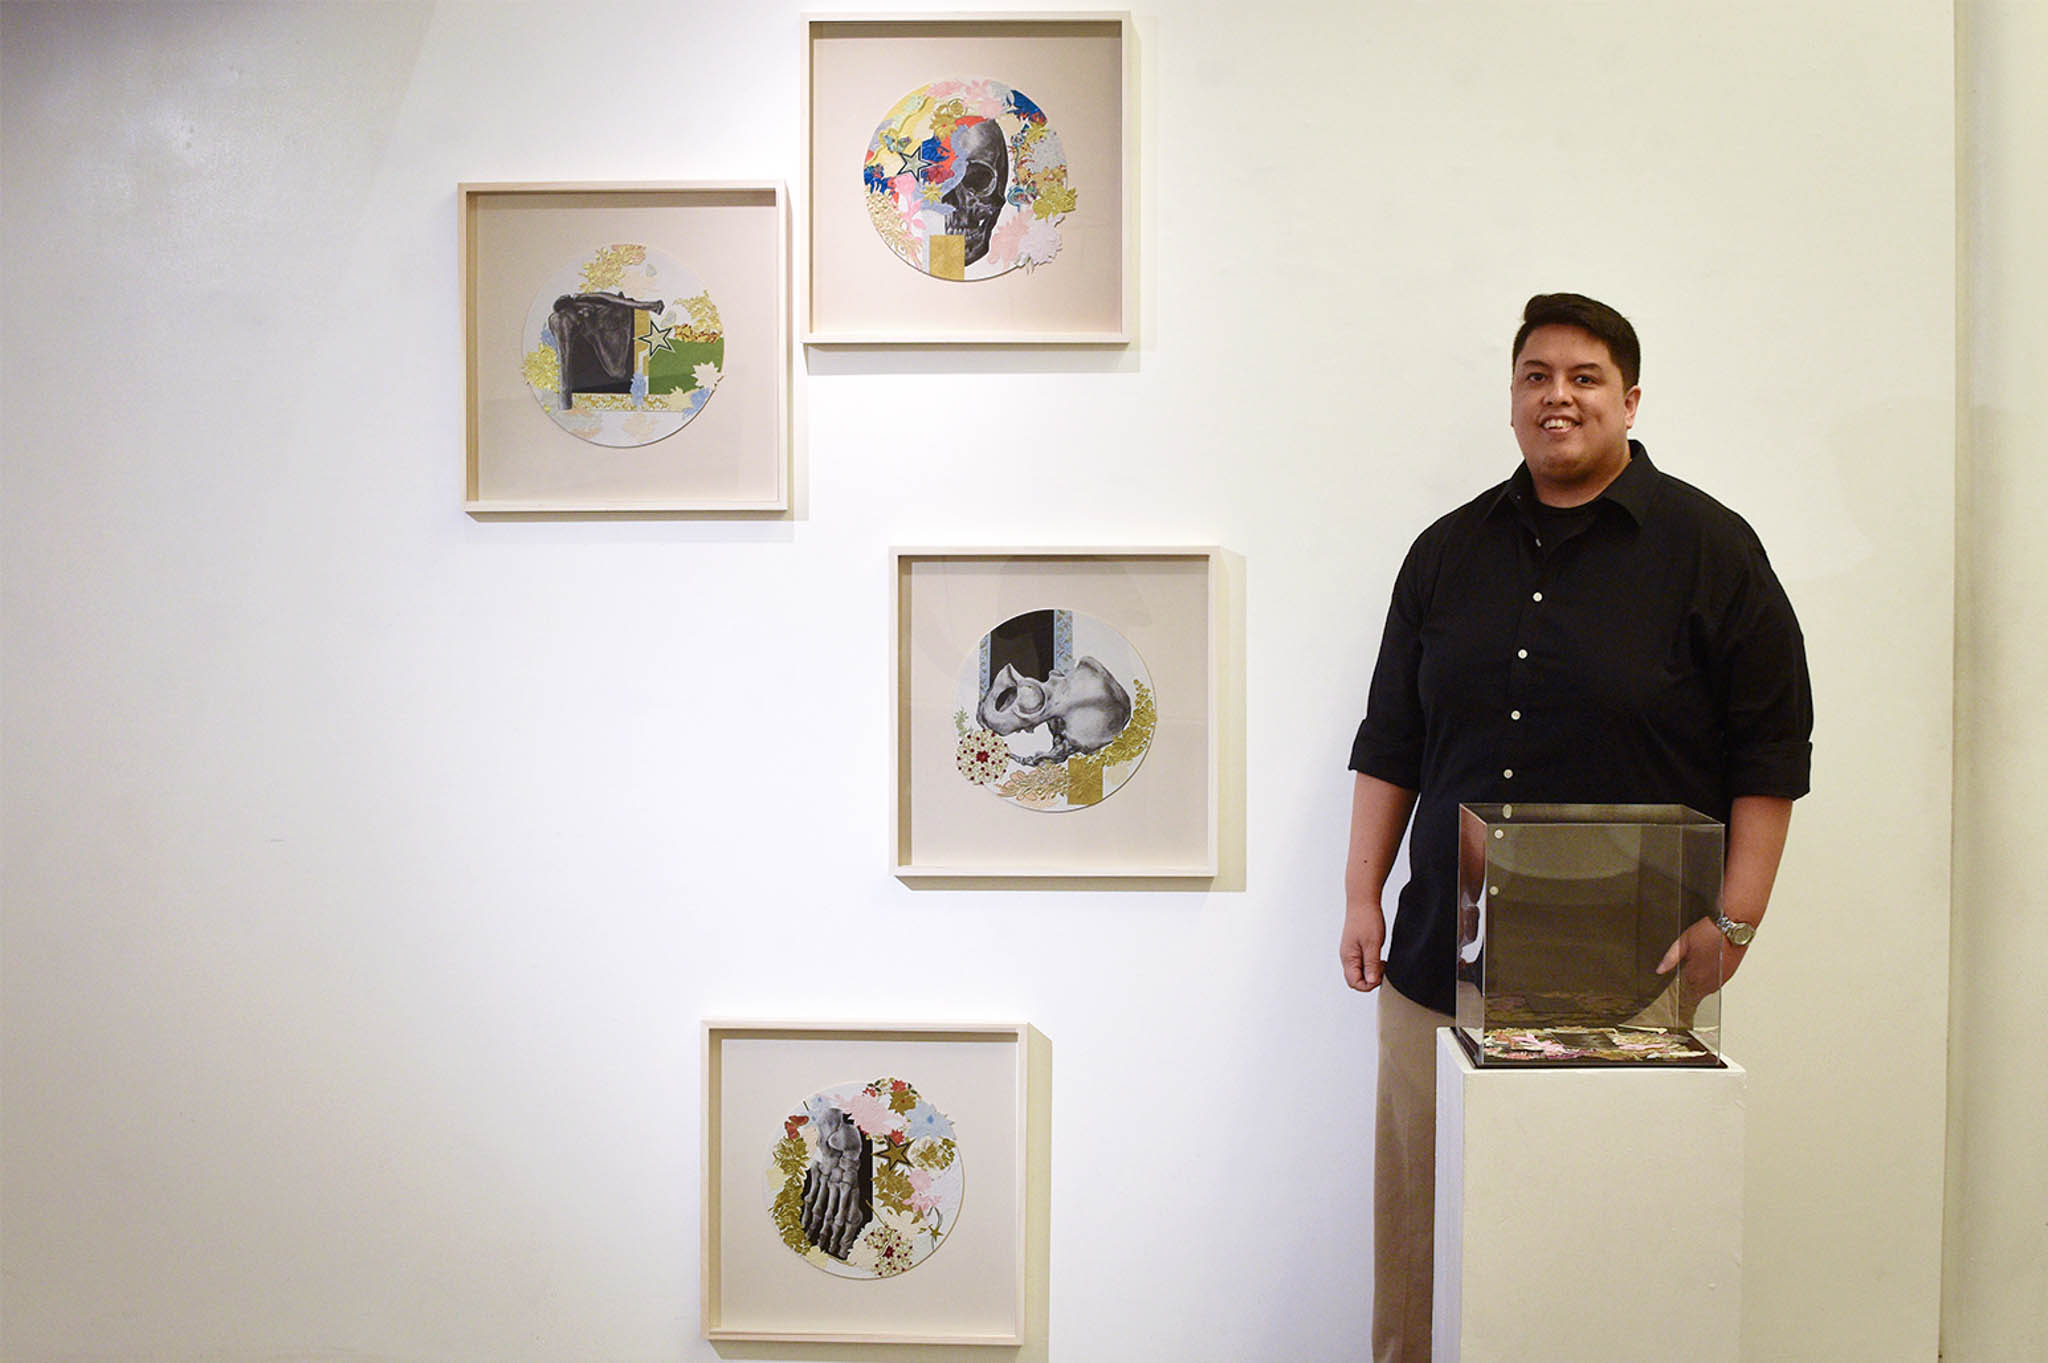 Patrick de Veyra, curator of the Pale Blue Dot, with his hyperrealistic graphite drawing and dry embossed collage series titled "Ornament and Remains"